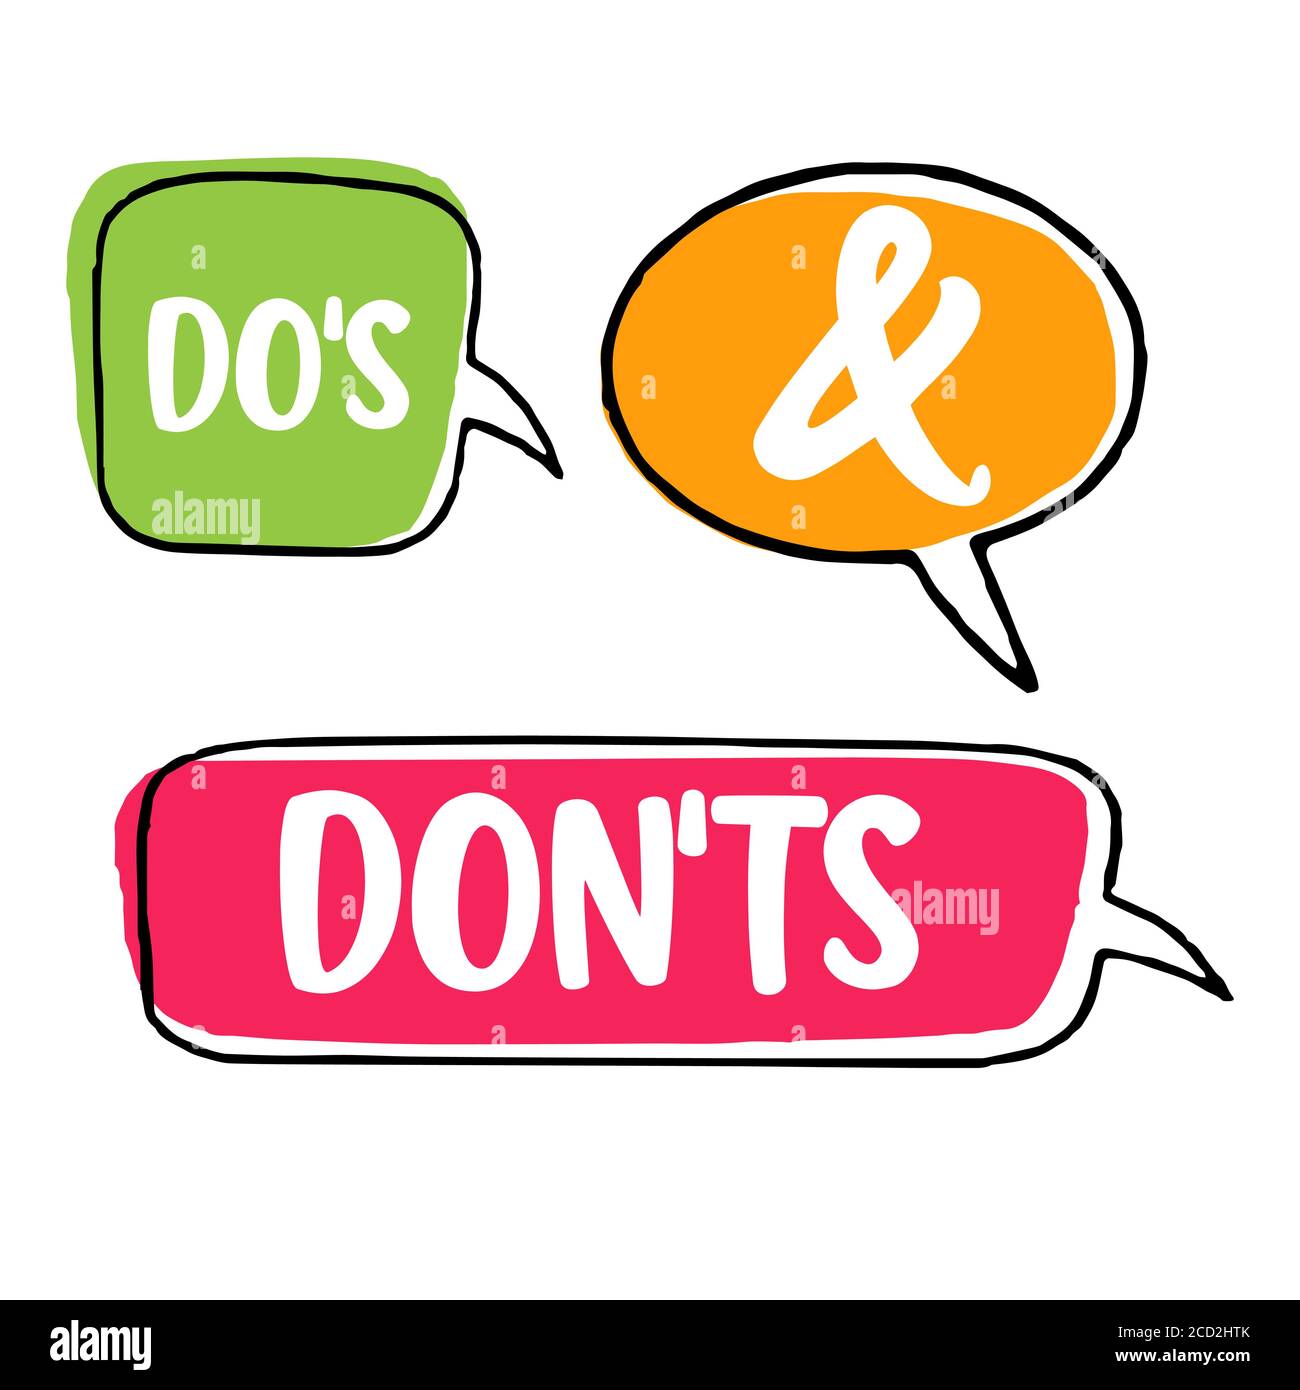 Do's and Don'ts. Vector hand drawn speech bubbles, label, badge, sticker illustration on white background Stock Vector